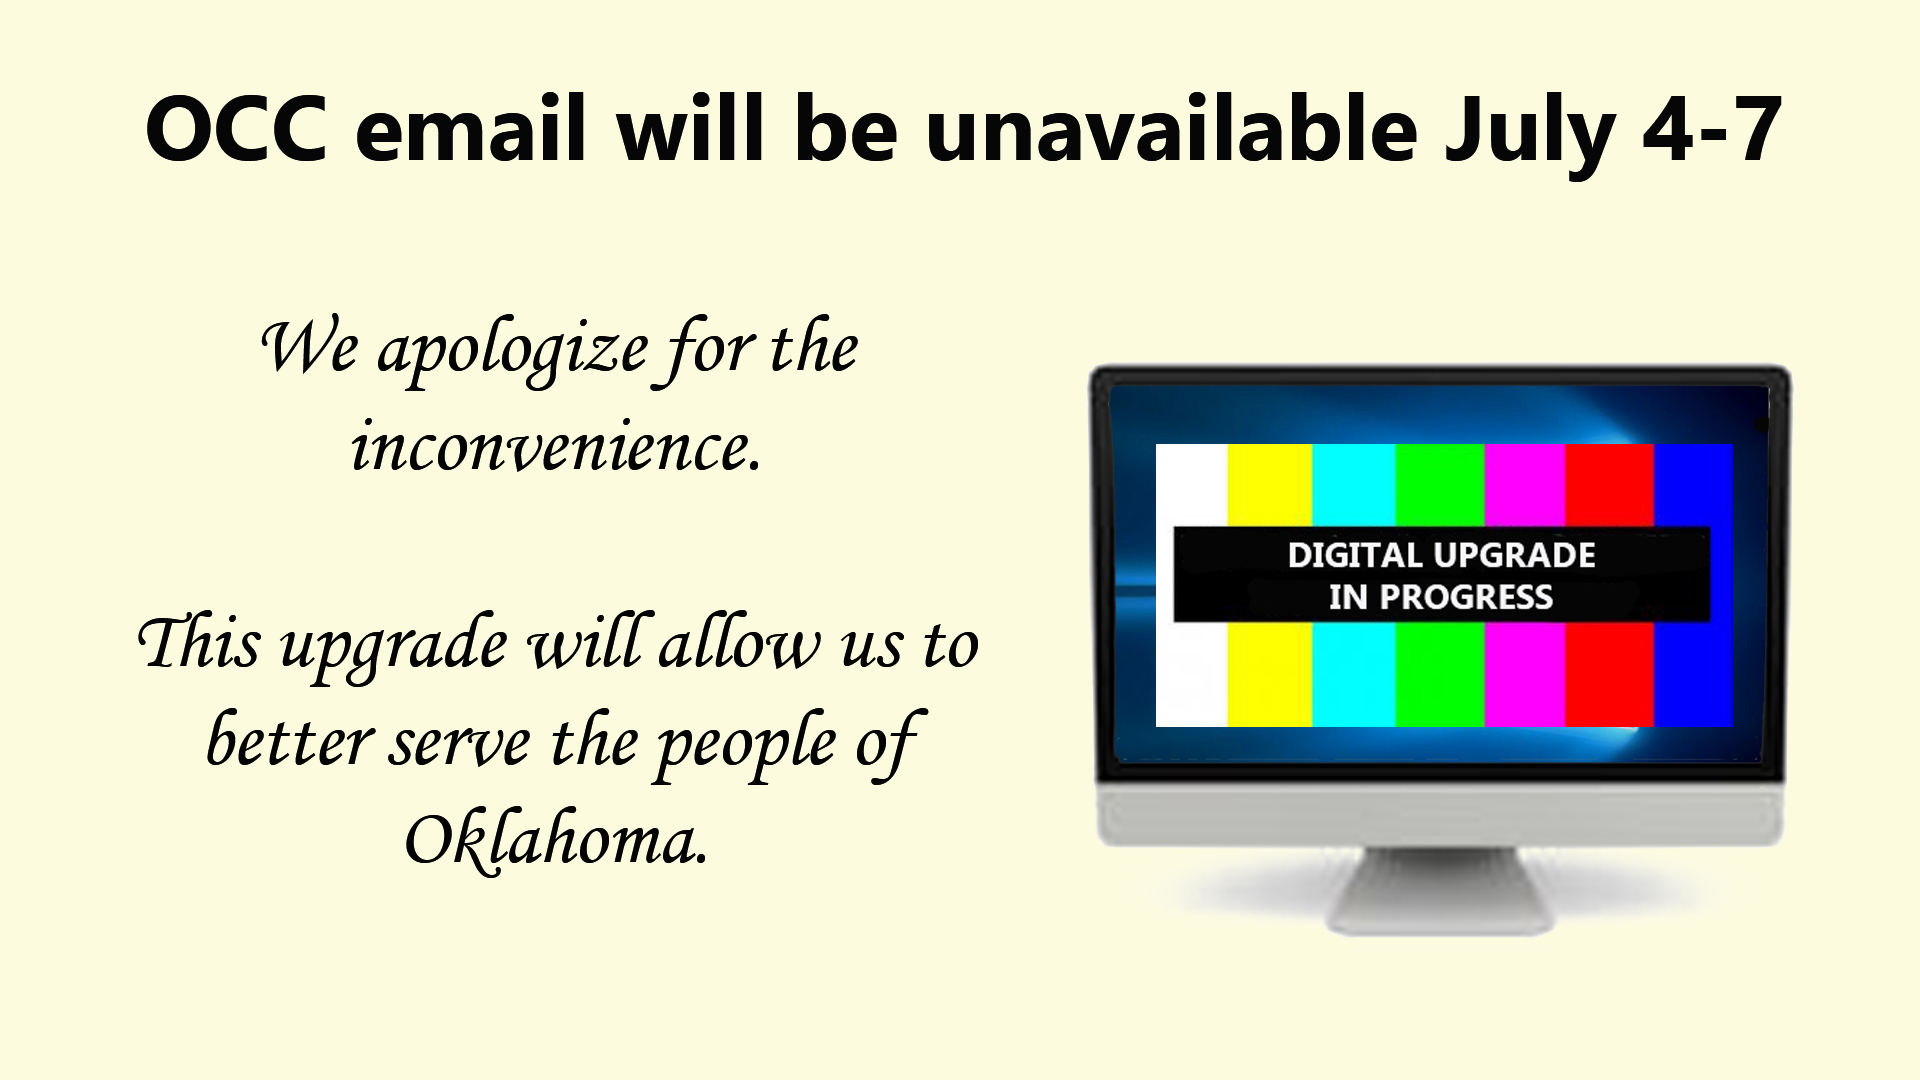 OCC email be unavailable July 4-7, 2019. We apologize for the inconvenience. This upgrade will allow us to better serve the people of Oklahoma.